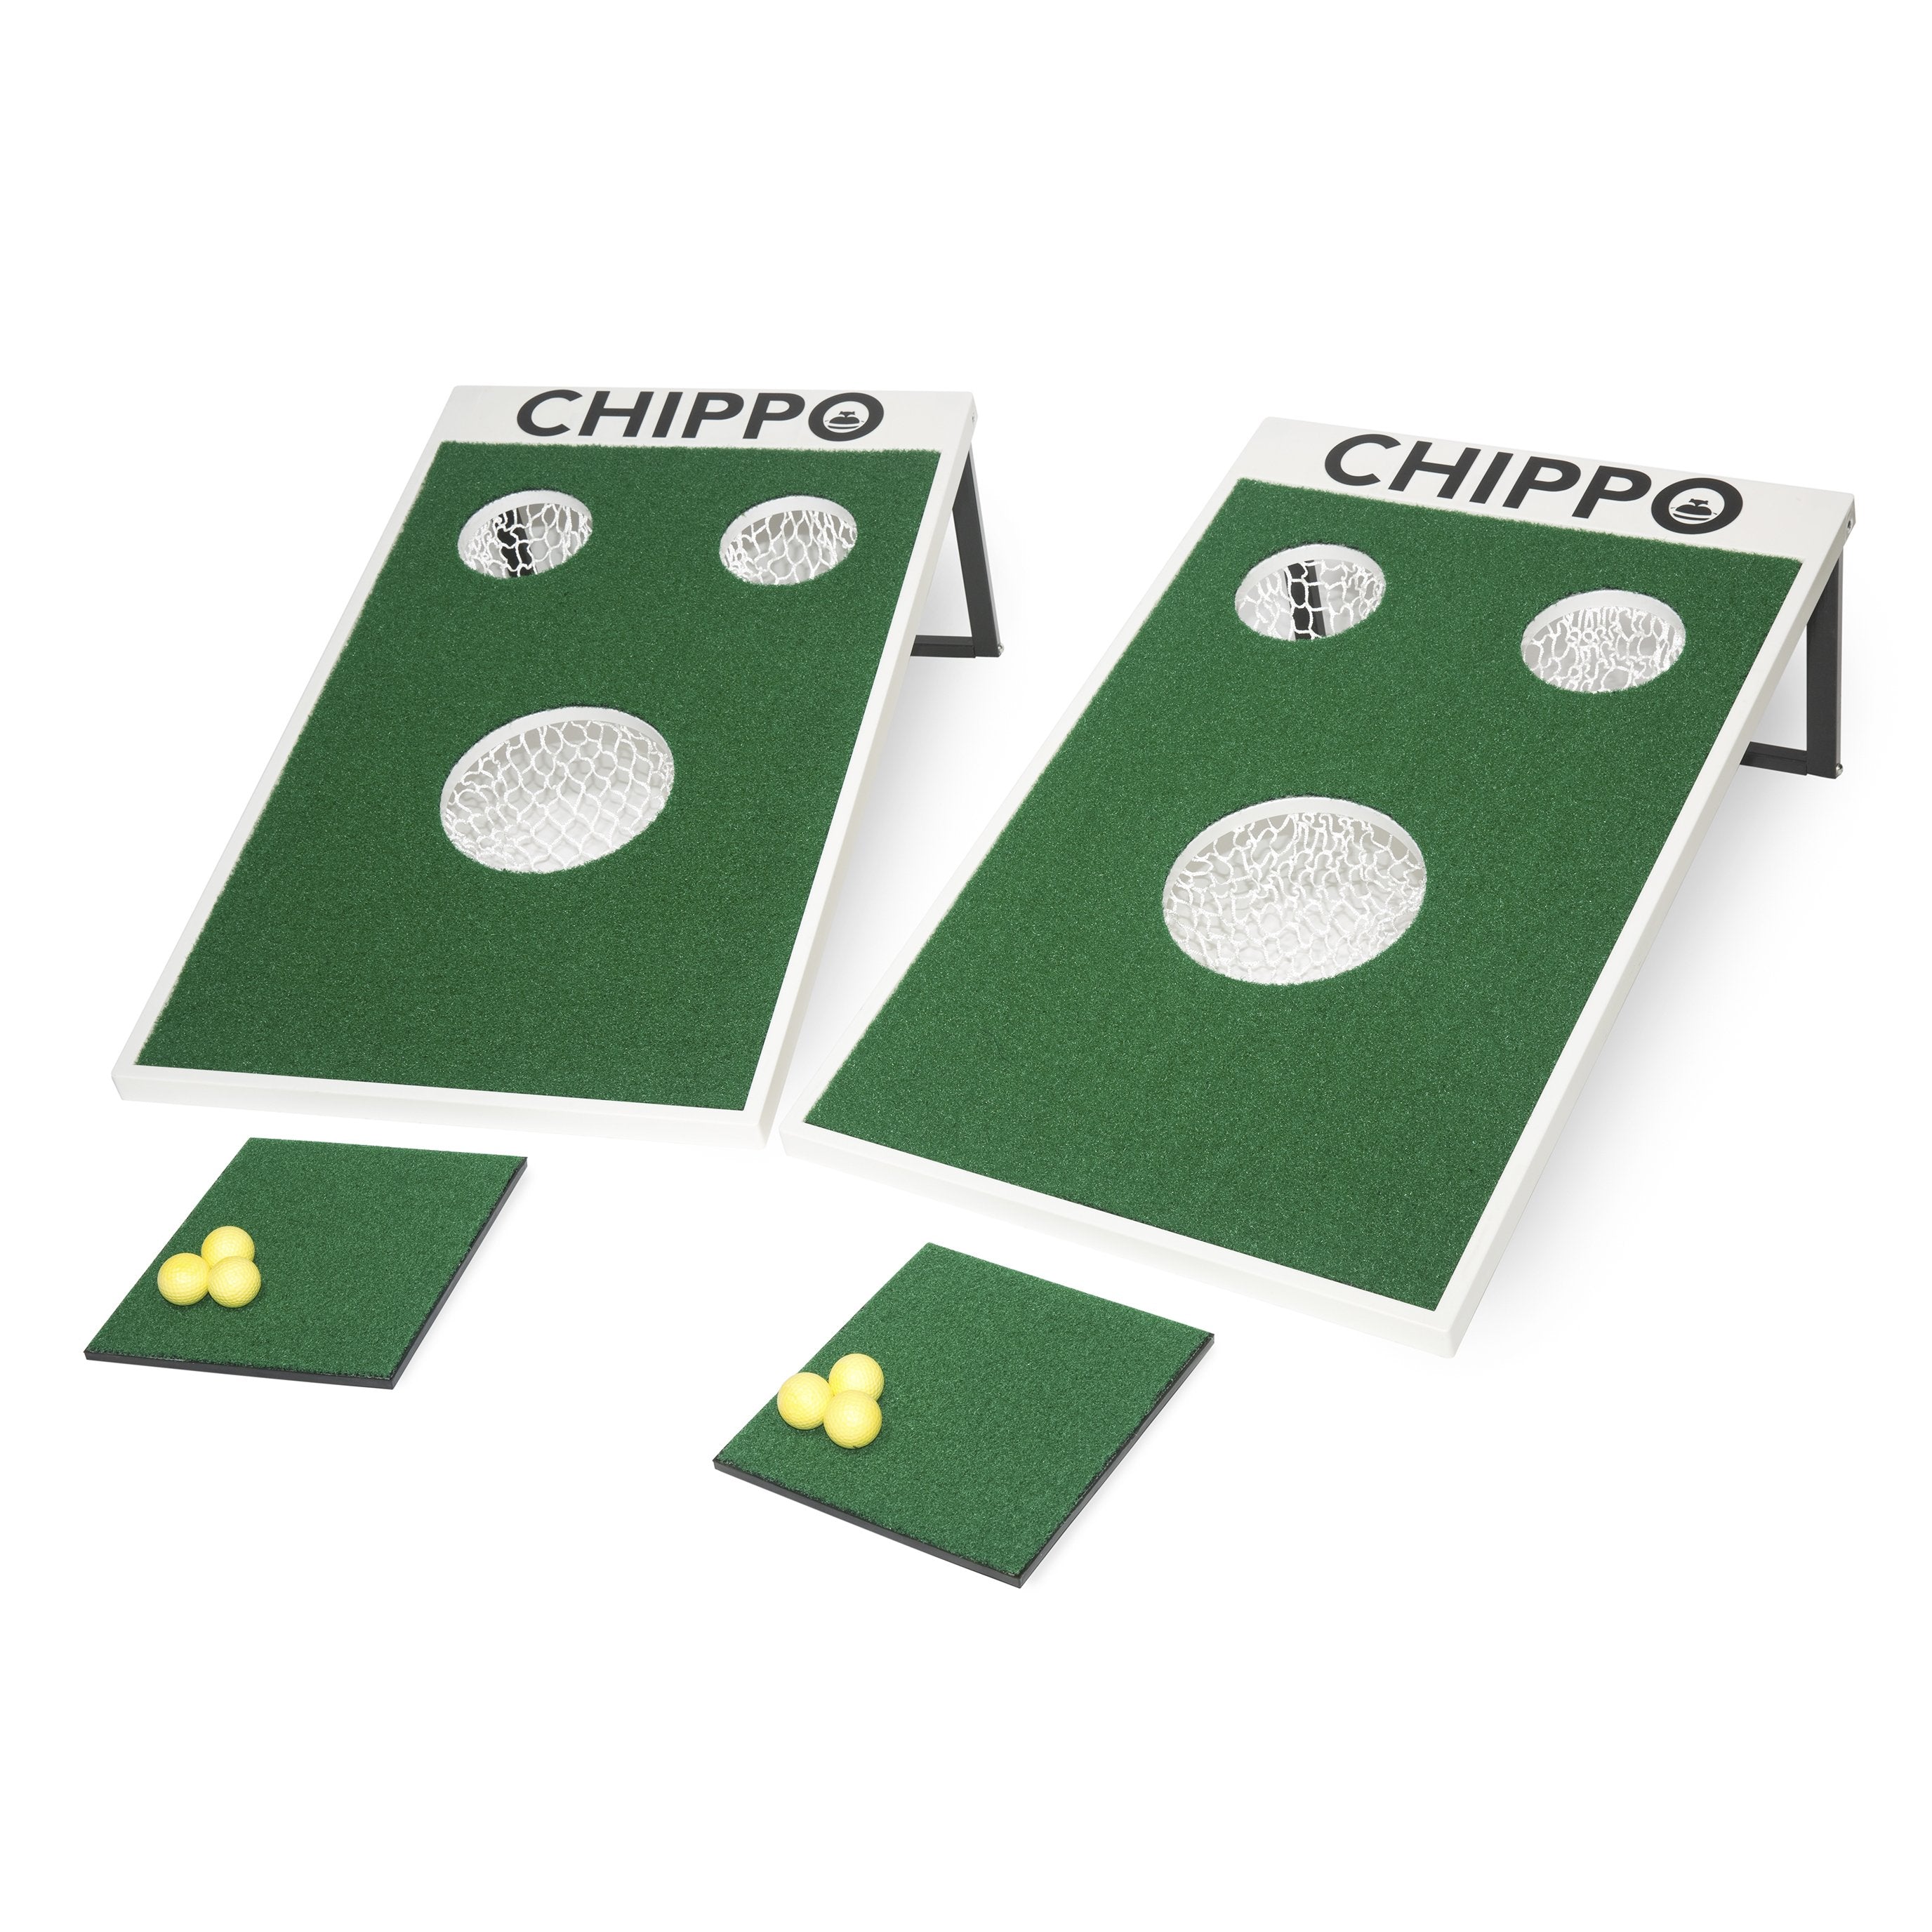 6021529 products chippo new 7